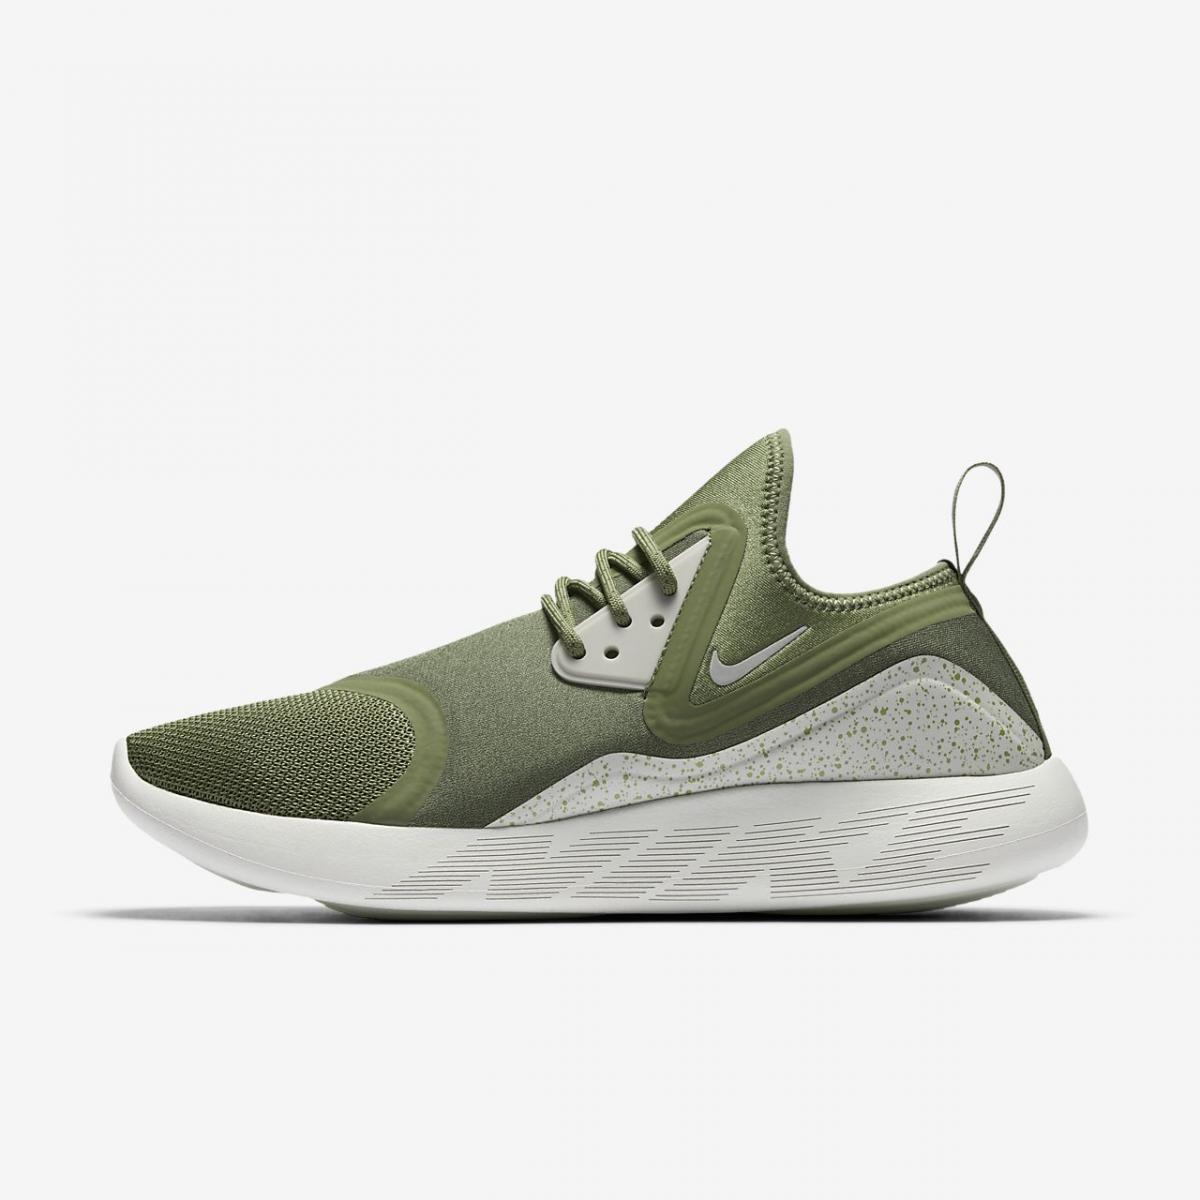 Colonial especificar Facturable Hombre LunarCharge Essential Verde palmera/Voltio/Hueso claro | Lifestyle  Nike — Grupozyn